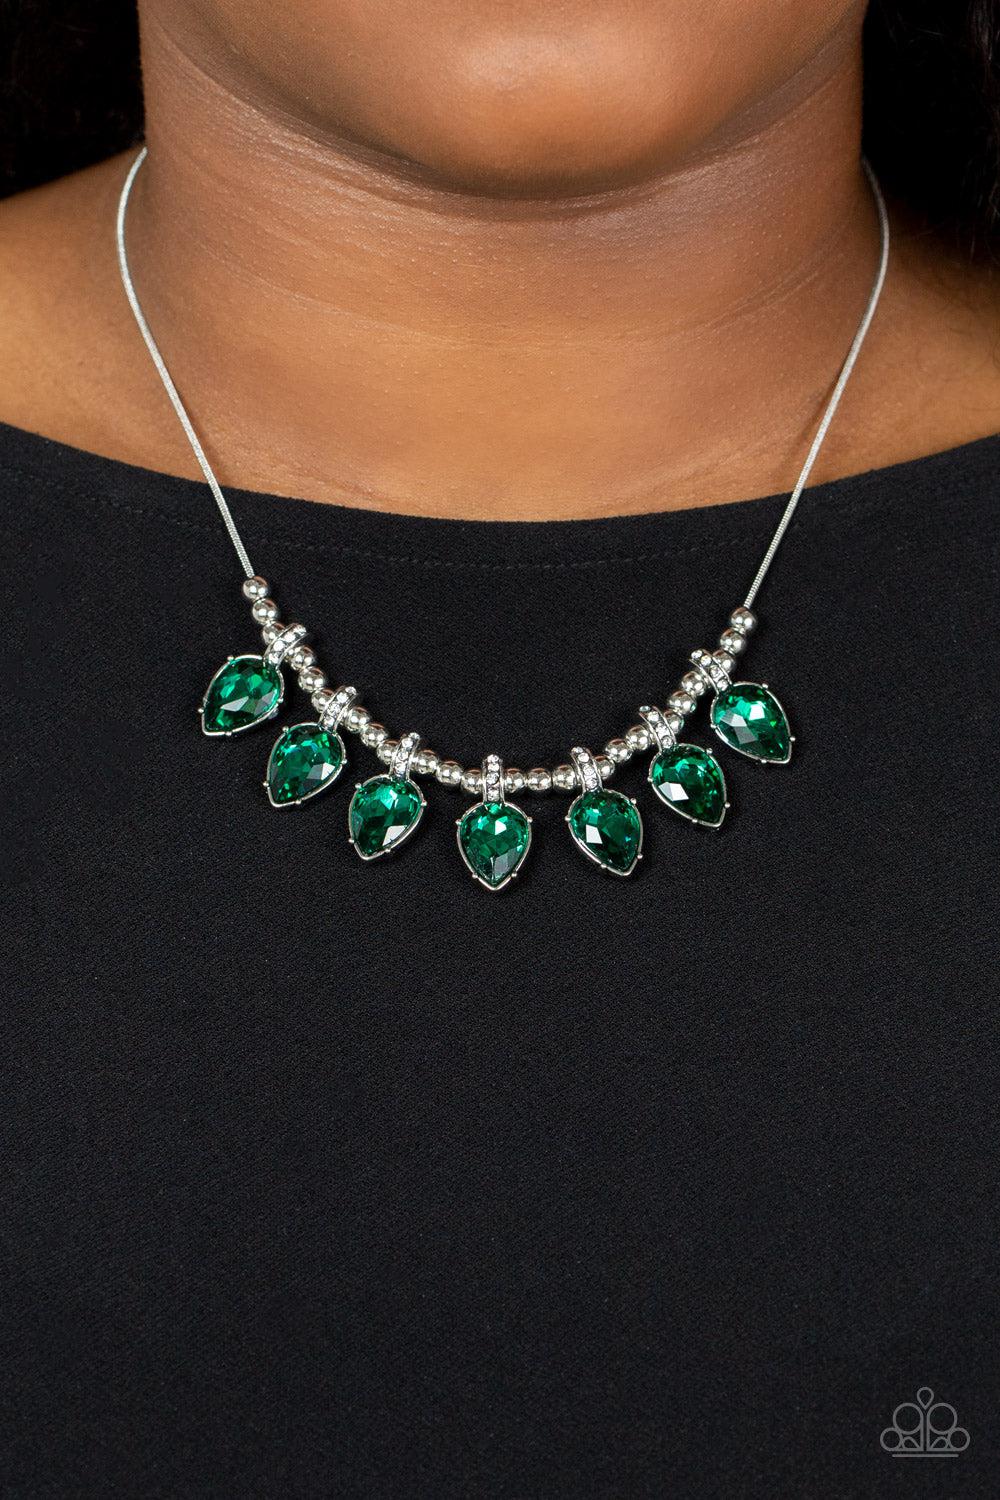 Crown Jewel Couture Green Rhinestone Necklace - Paparazzi Accessories- lightbox - CarasShop.com - $5 Jewelry by Cara Jewels